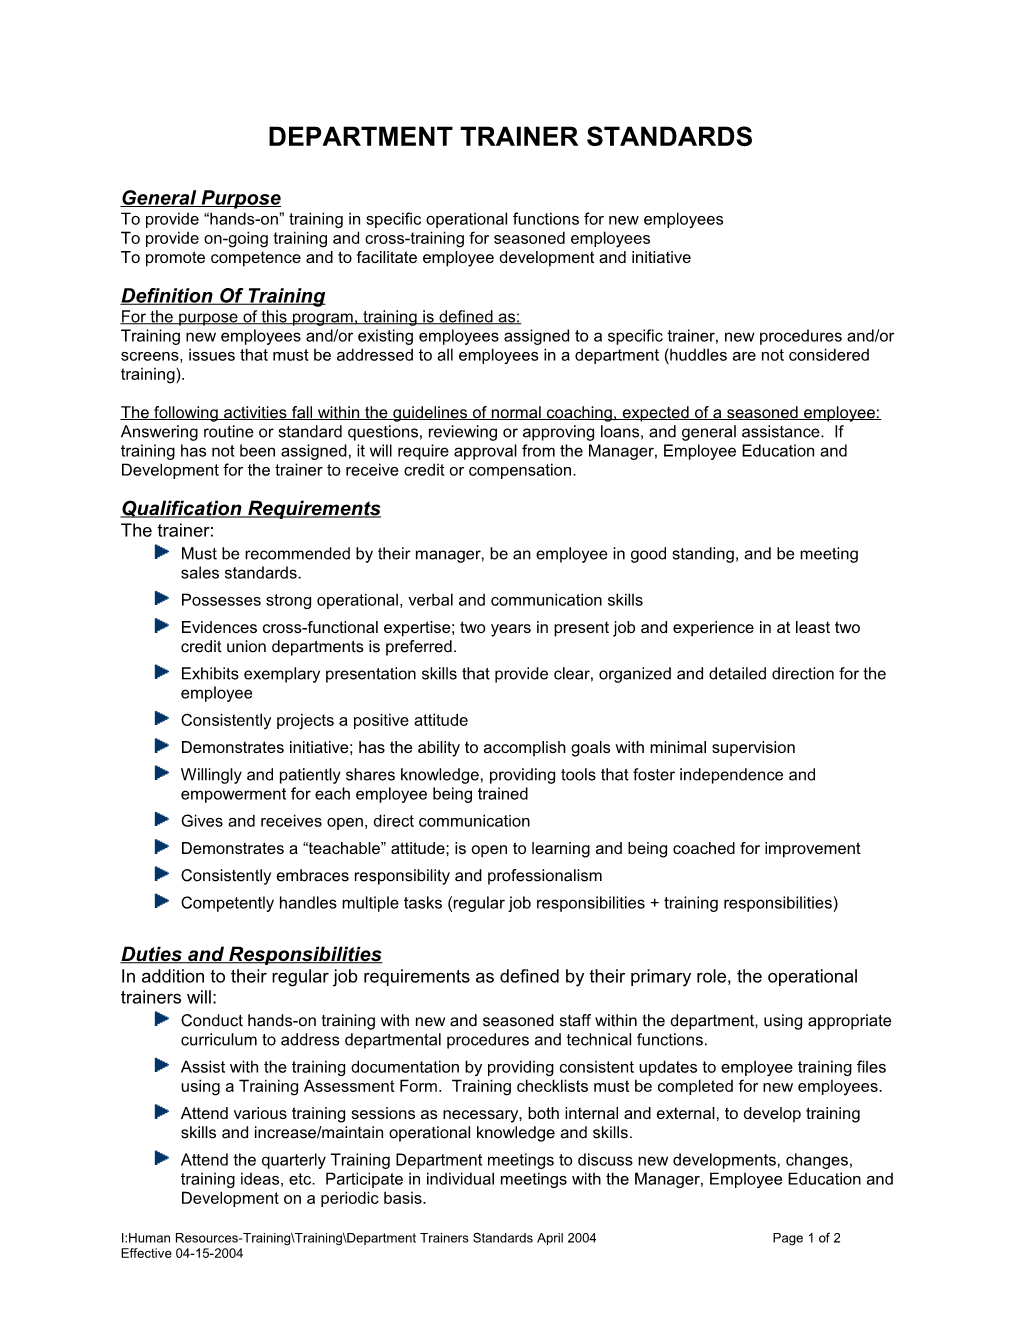 Department / Operations Trainer Standards